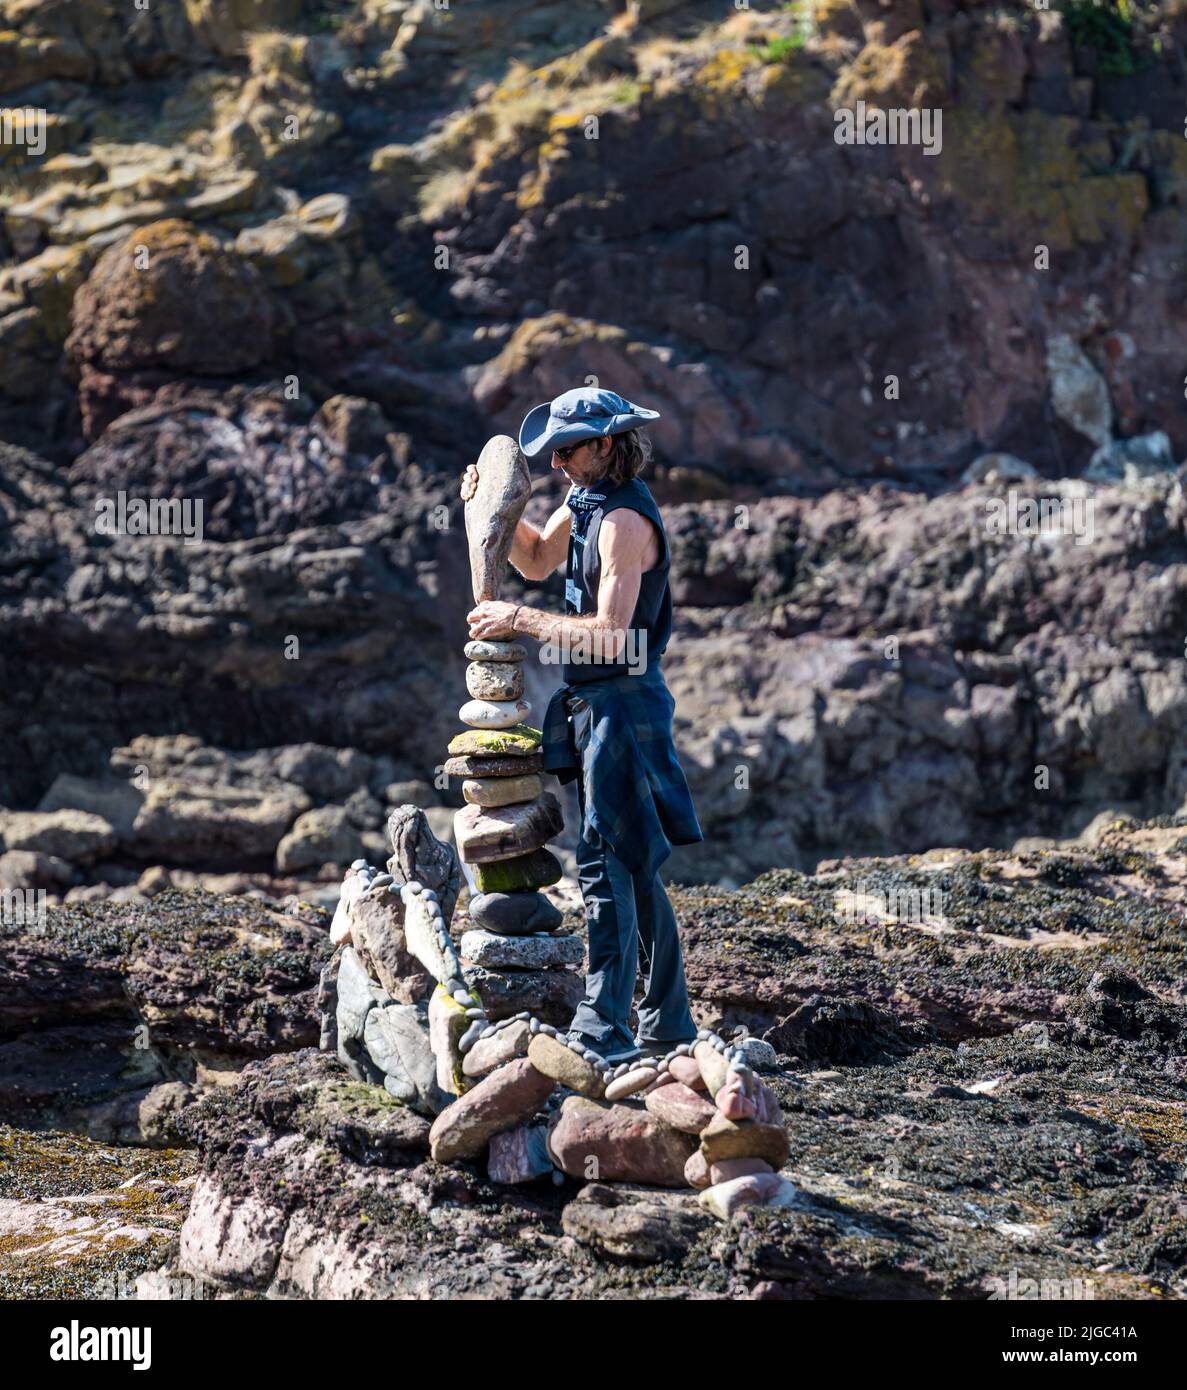 Dunbar, East Lothian, Scotland, UK, 9th July 2022. European Stone Stacking Championship: participants have 3.5 hours to create an artistic artwork from the rocks on Eye Cave Beach. Pictured: Pedro Duran, stone stacker Stock Photo